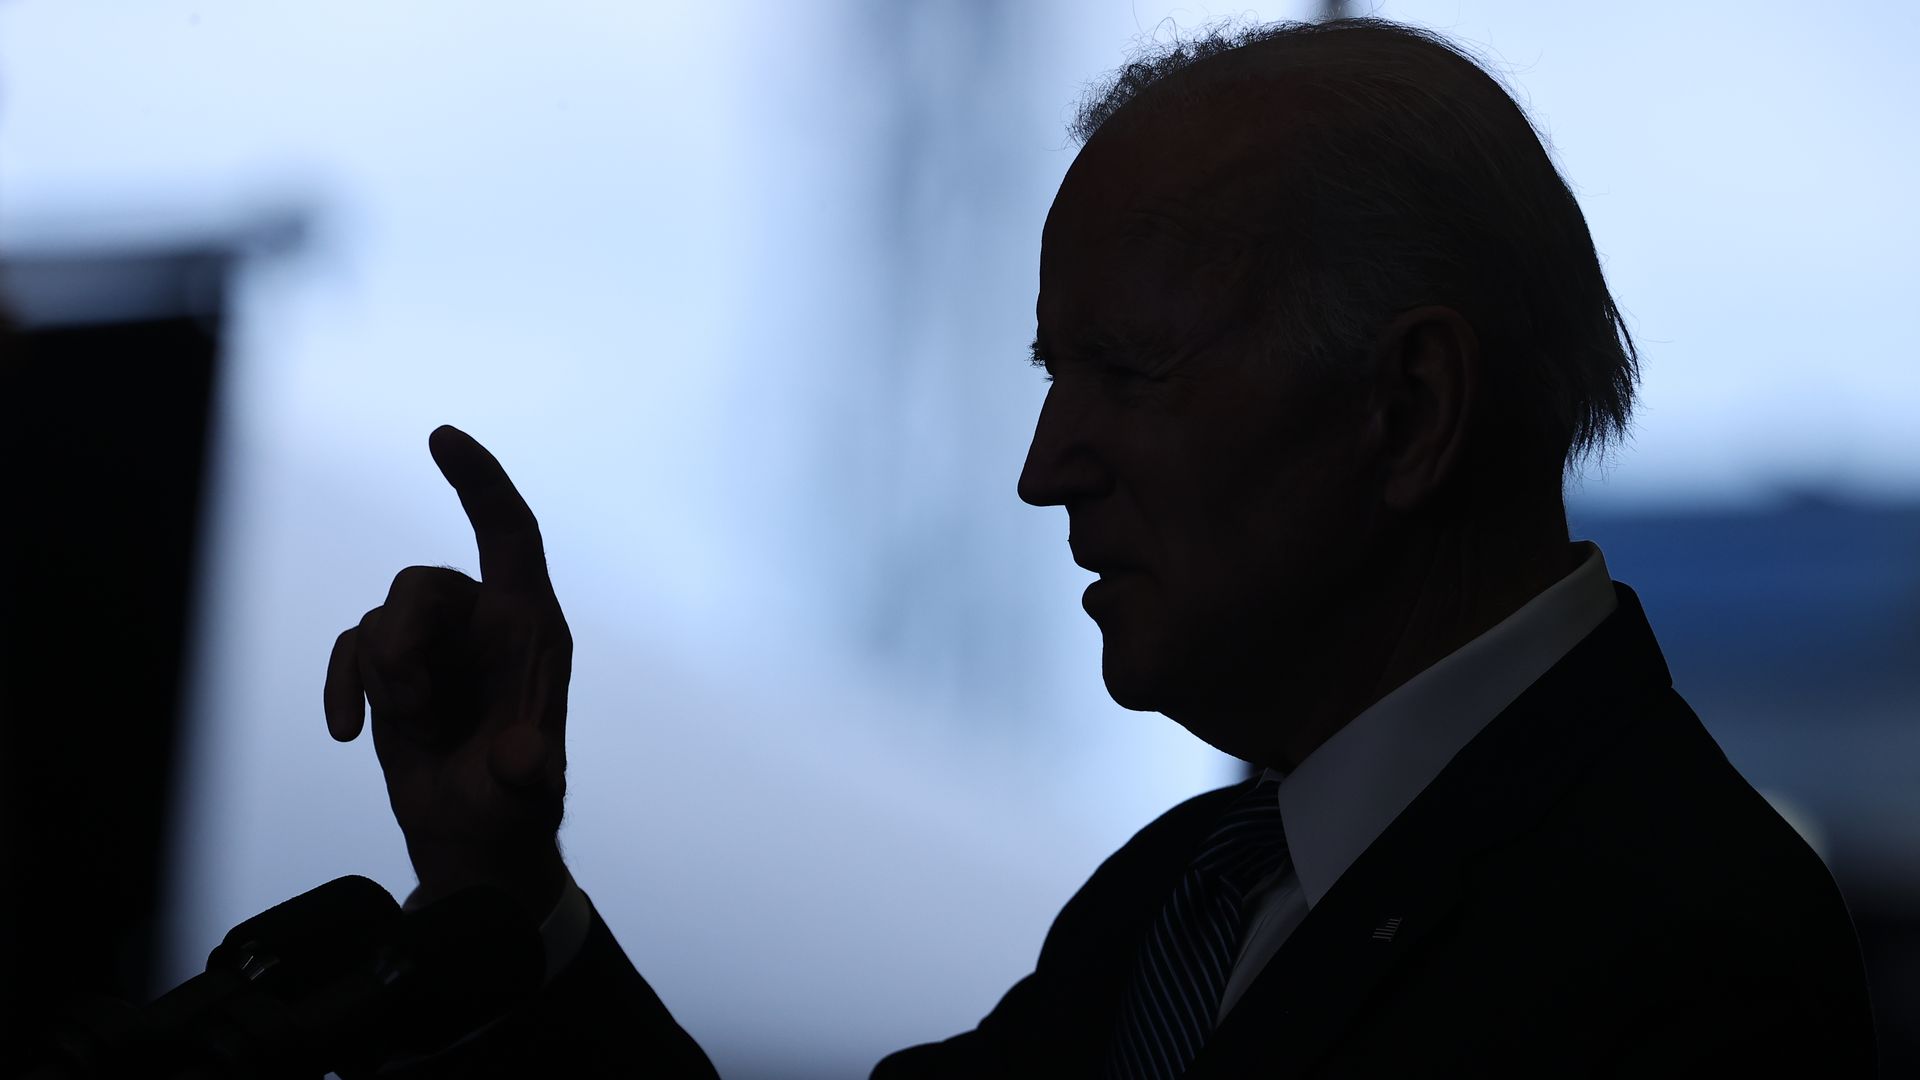 President Biden is seen speaking in silhouette while visiting Portsmouth, N.H., on Tuesday.